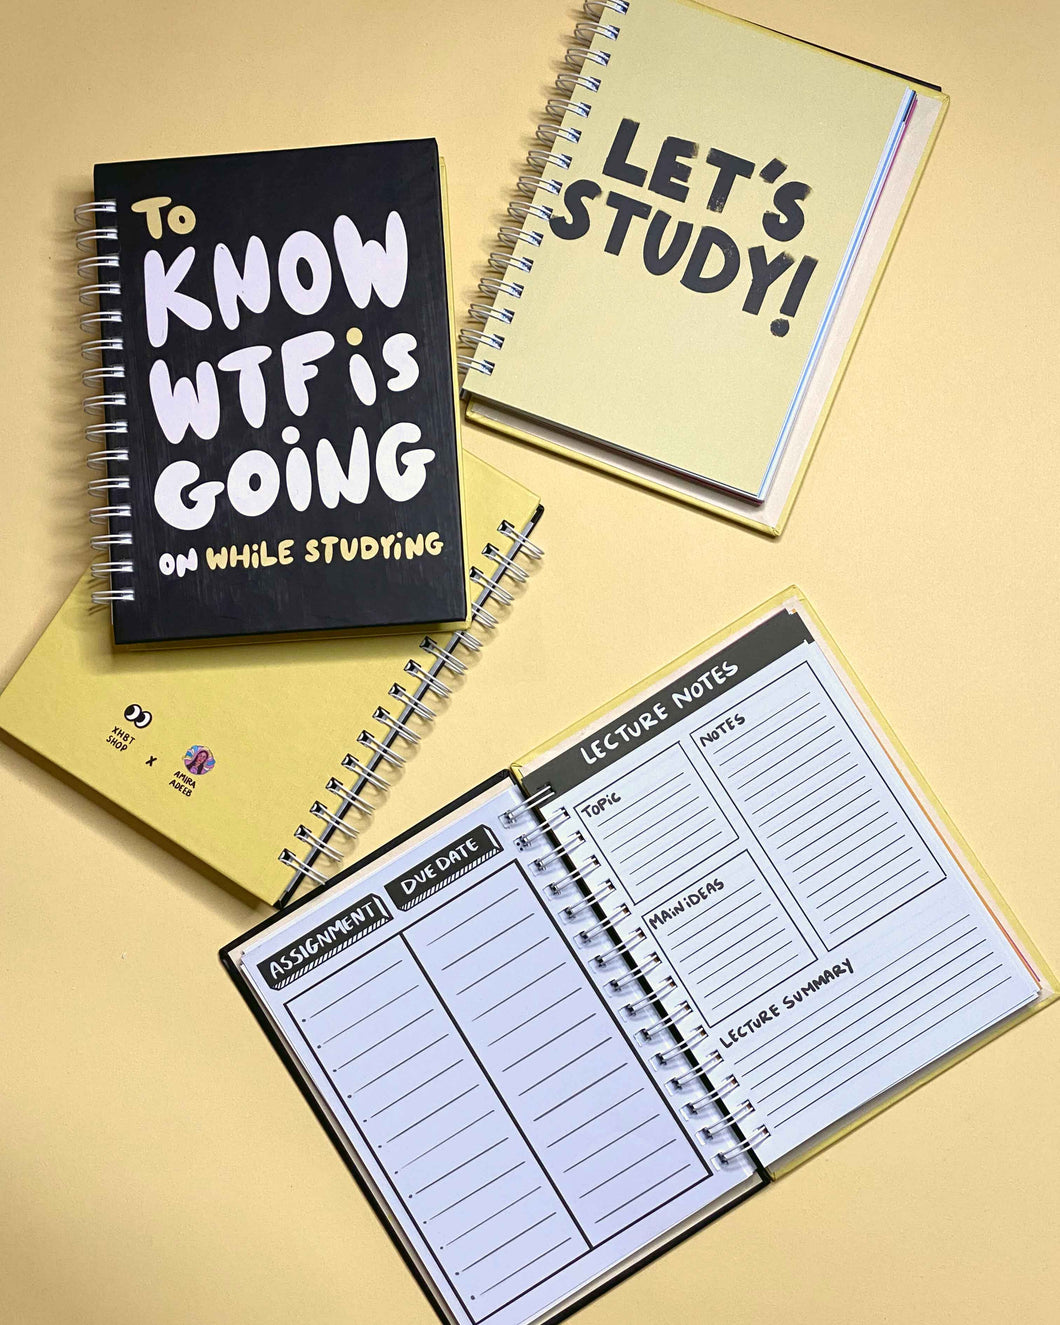 To Know WTF is going on - Study Planner